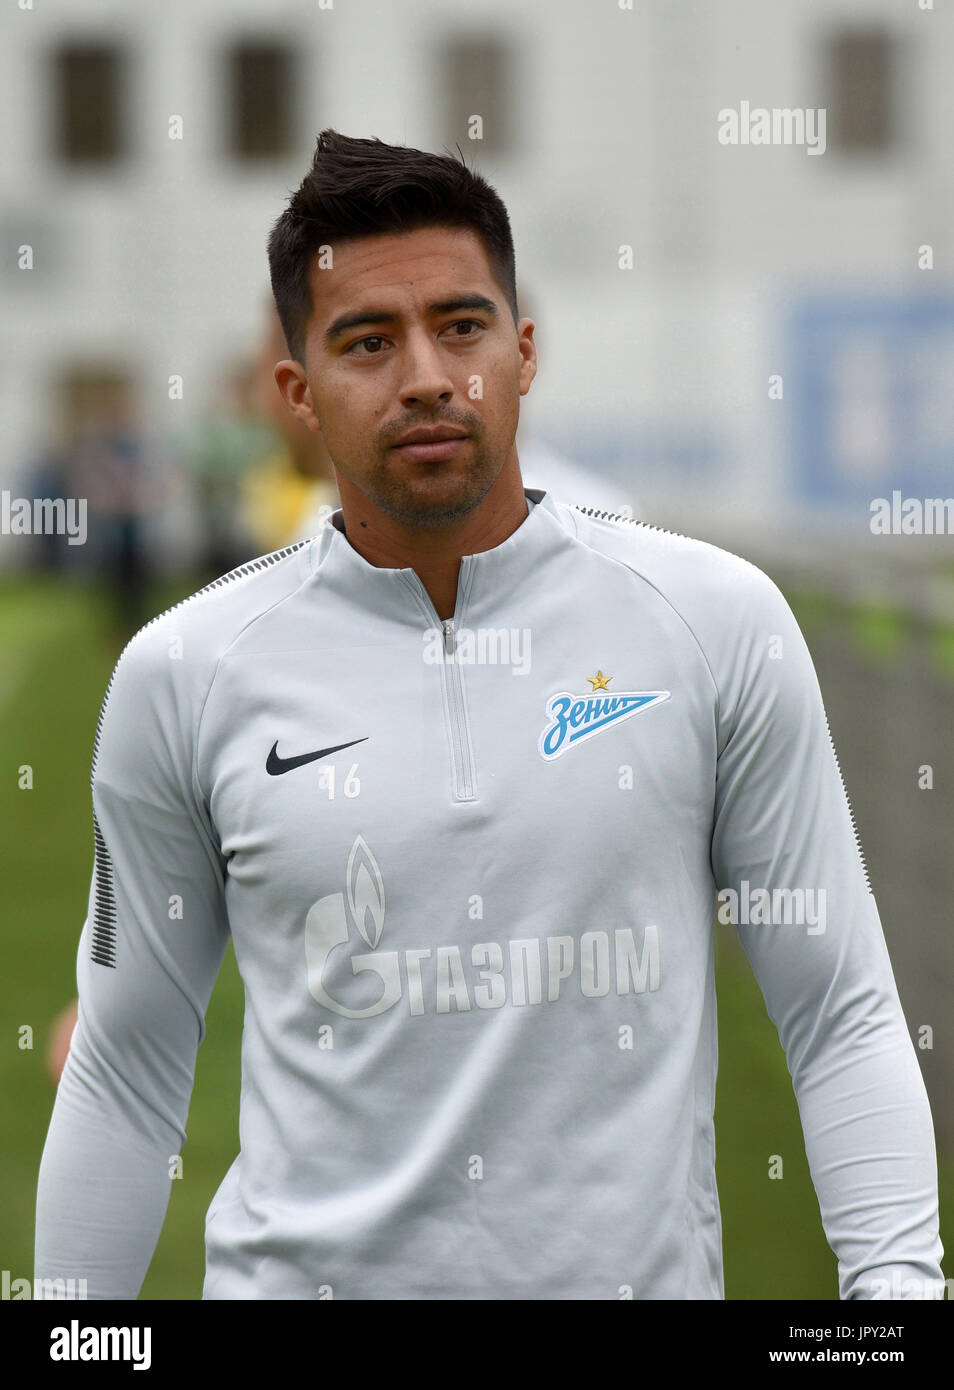 St. Petersburg, Russia. 2nd Aug, 2017. Russia, St. Petersburg, on August 2, 2017. The player of F.C. Zenit Christian Noboa at pre-game training, before match of the third qualification round of the UEFA Europa League between F.C. Zenit (St. Petersburg, Russia) and FC Bney-Iyeguda Credit: Andrey Pronin/ZUMA Wire/Alamy Live News Stock Photo